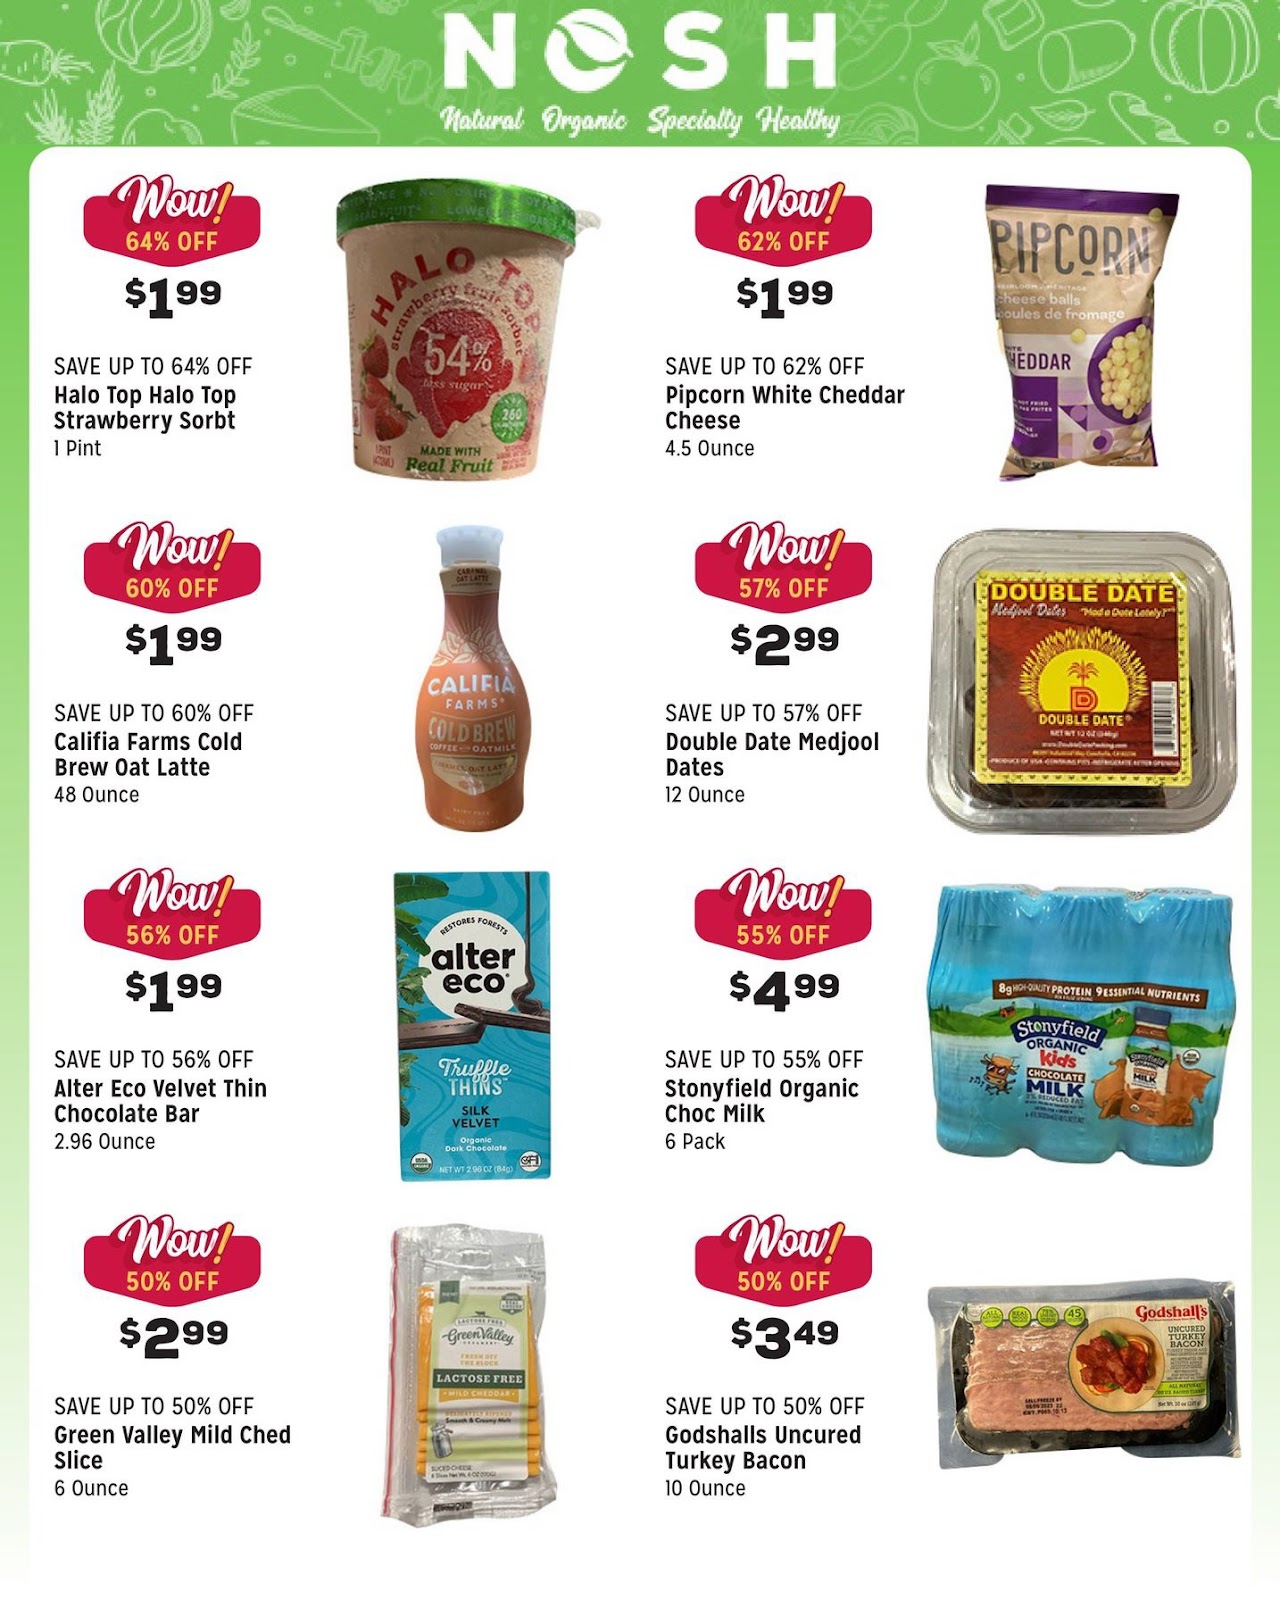 Grocery Outlet Weekly Ad - 3